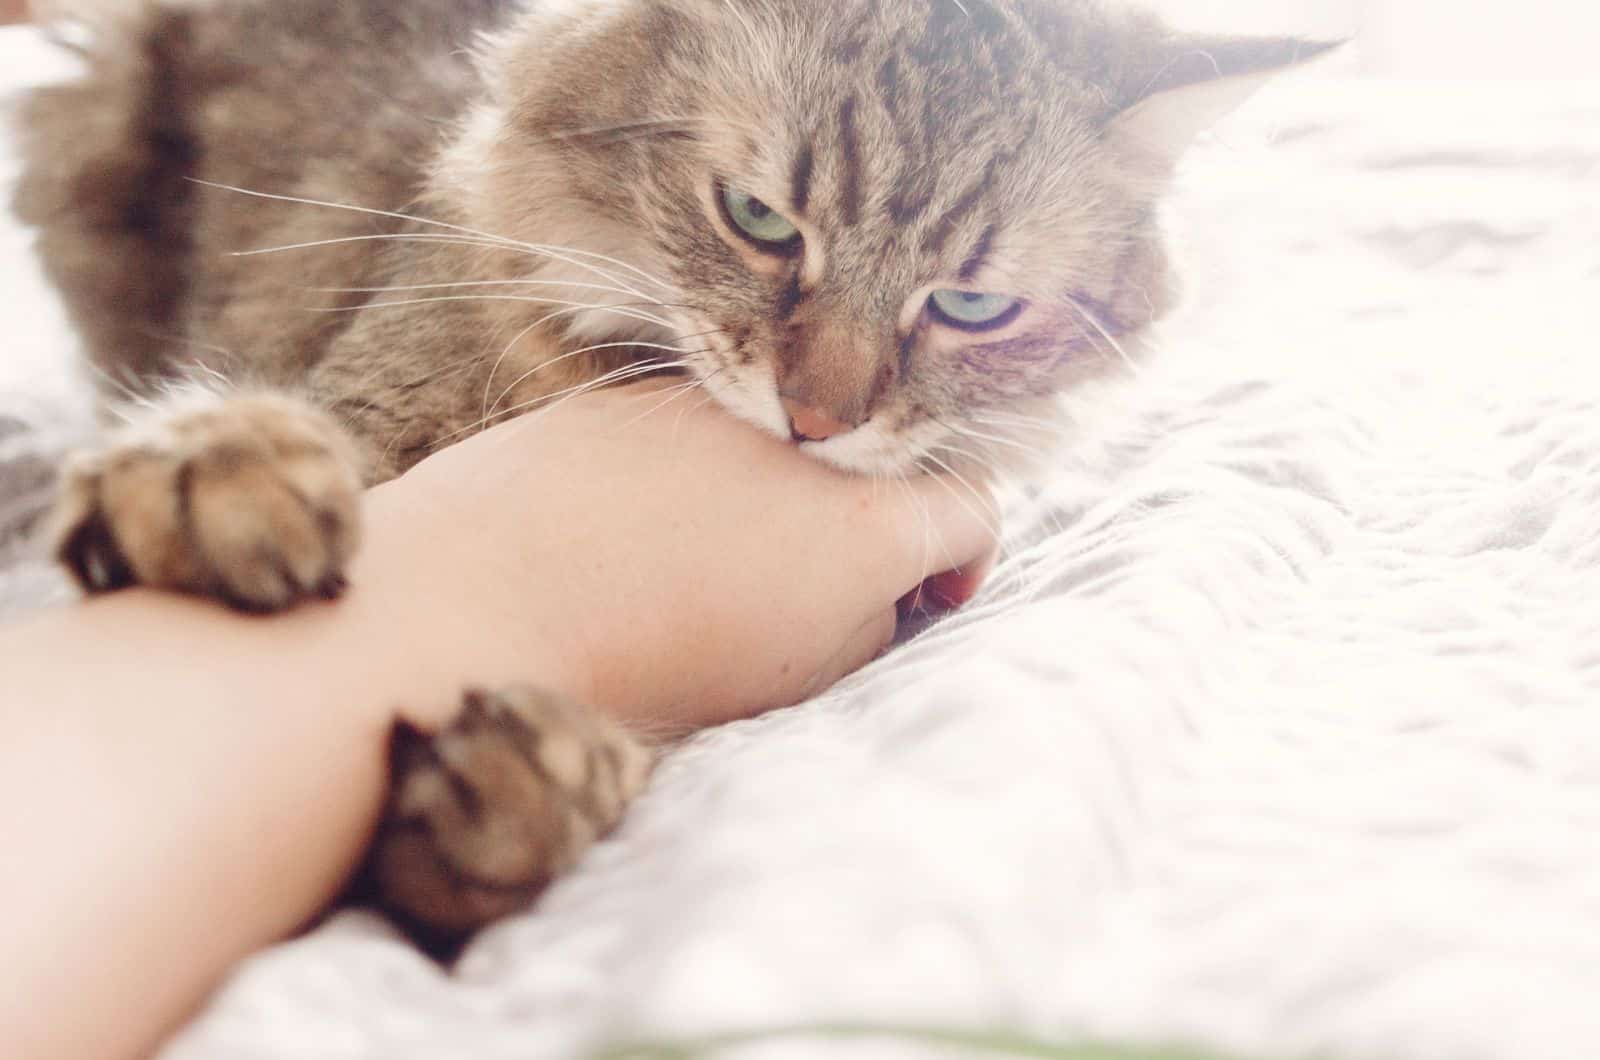 cat purring while biting hand